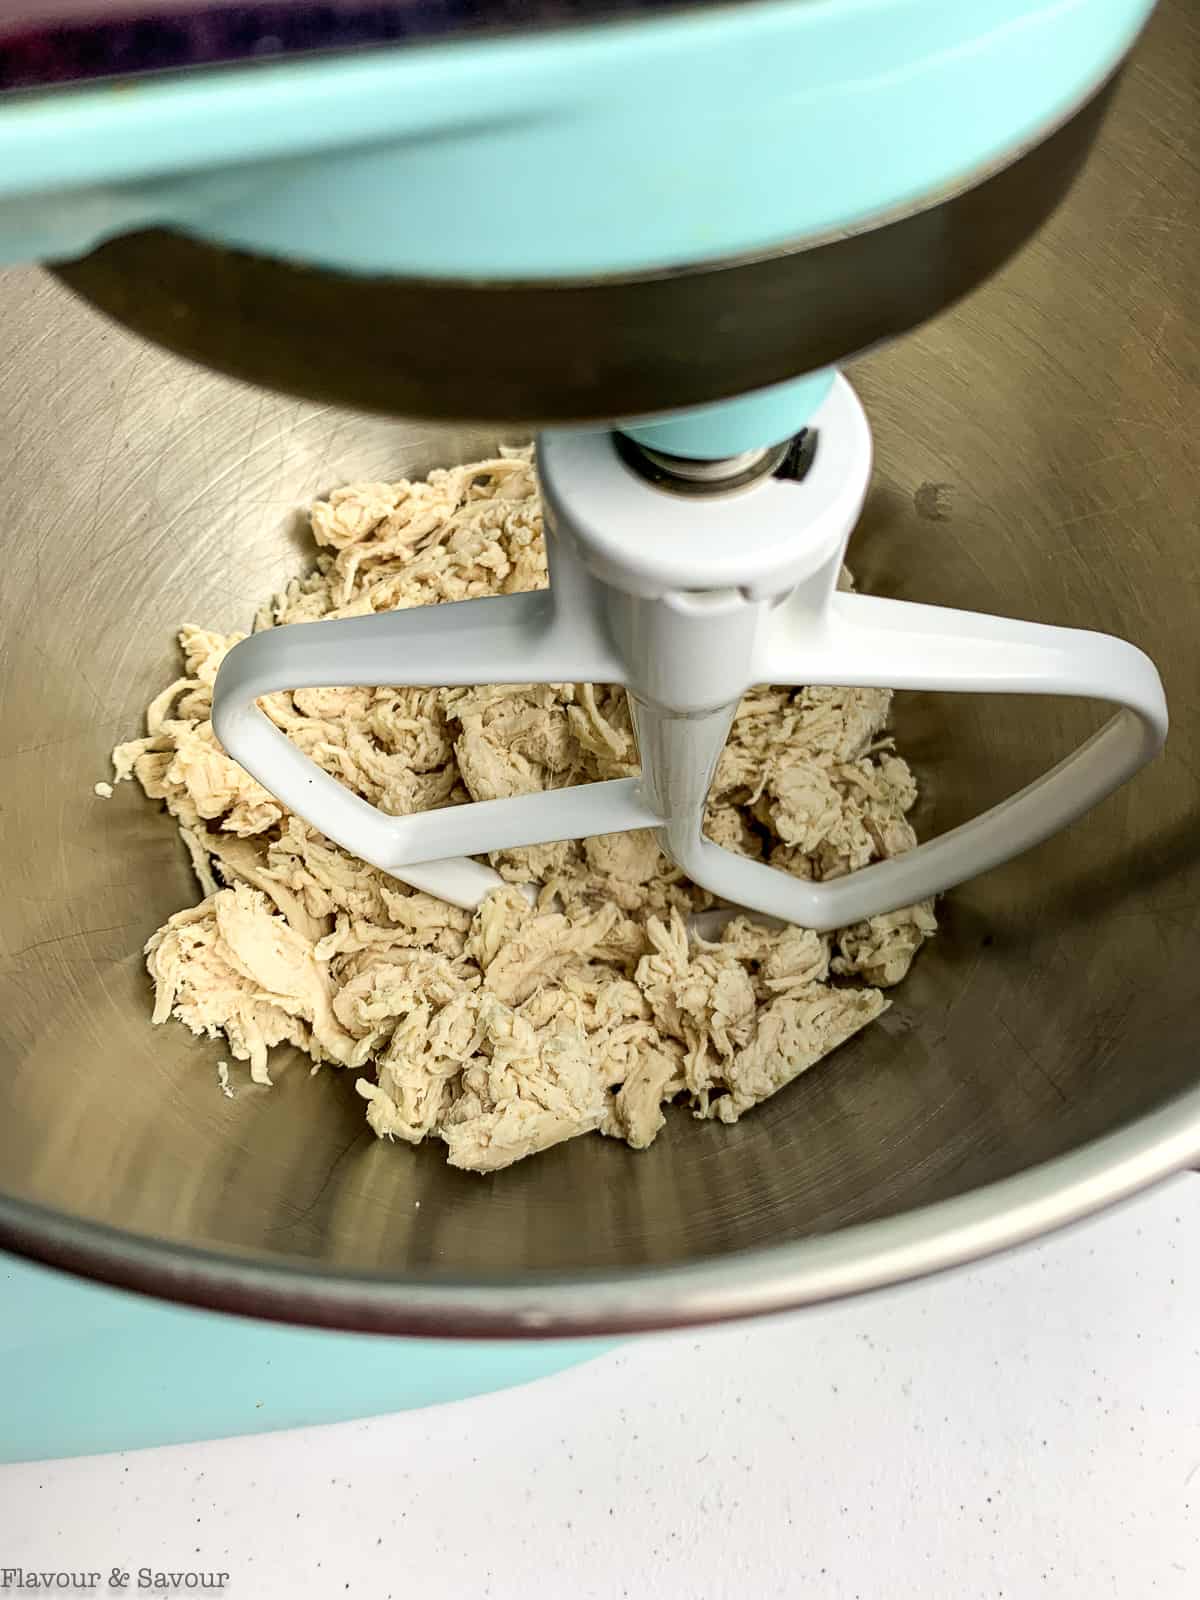 Shredding chicken with a stand mixer.